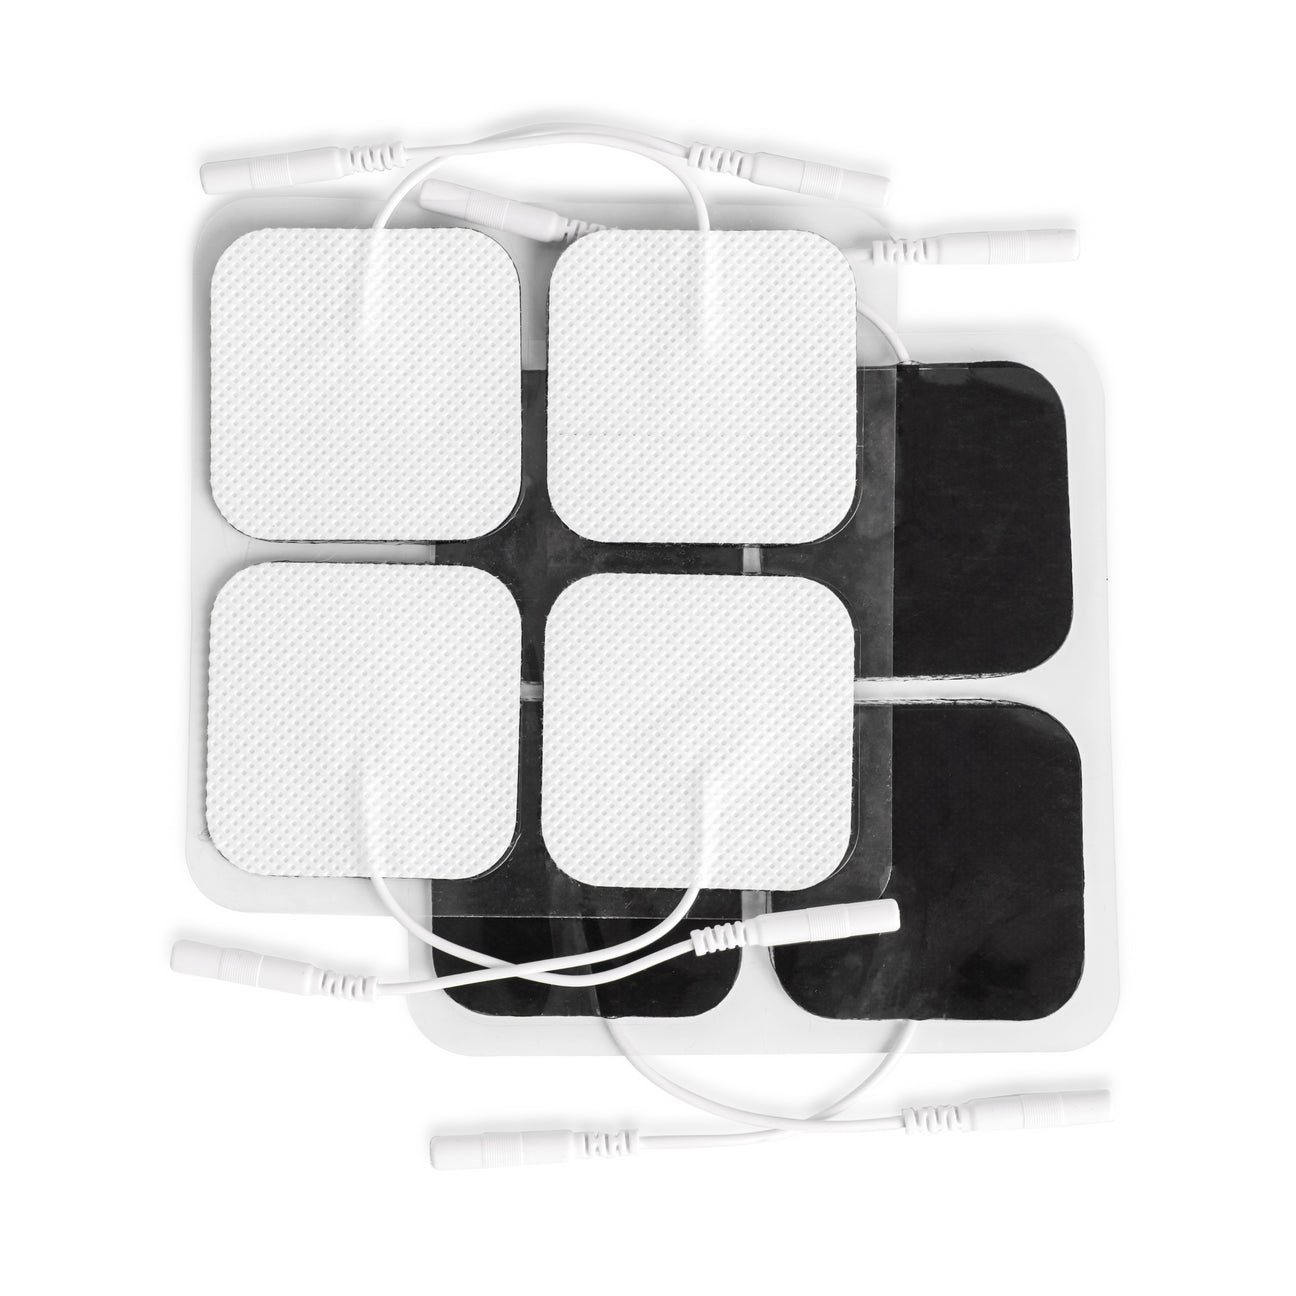 WEISIPU 3 Generic Gel Replacement Pads Electrodes Pads Compatible